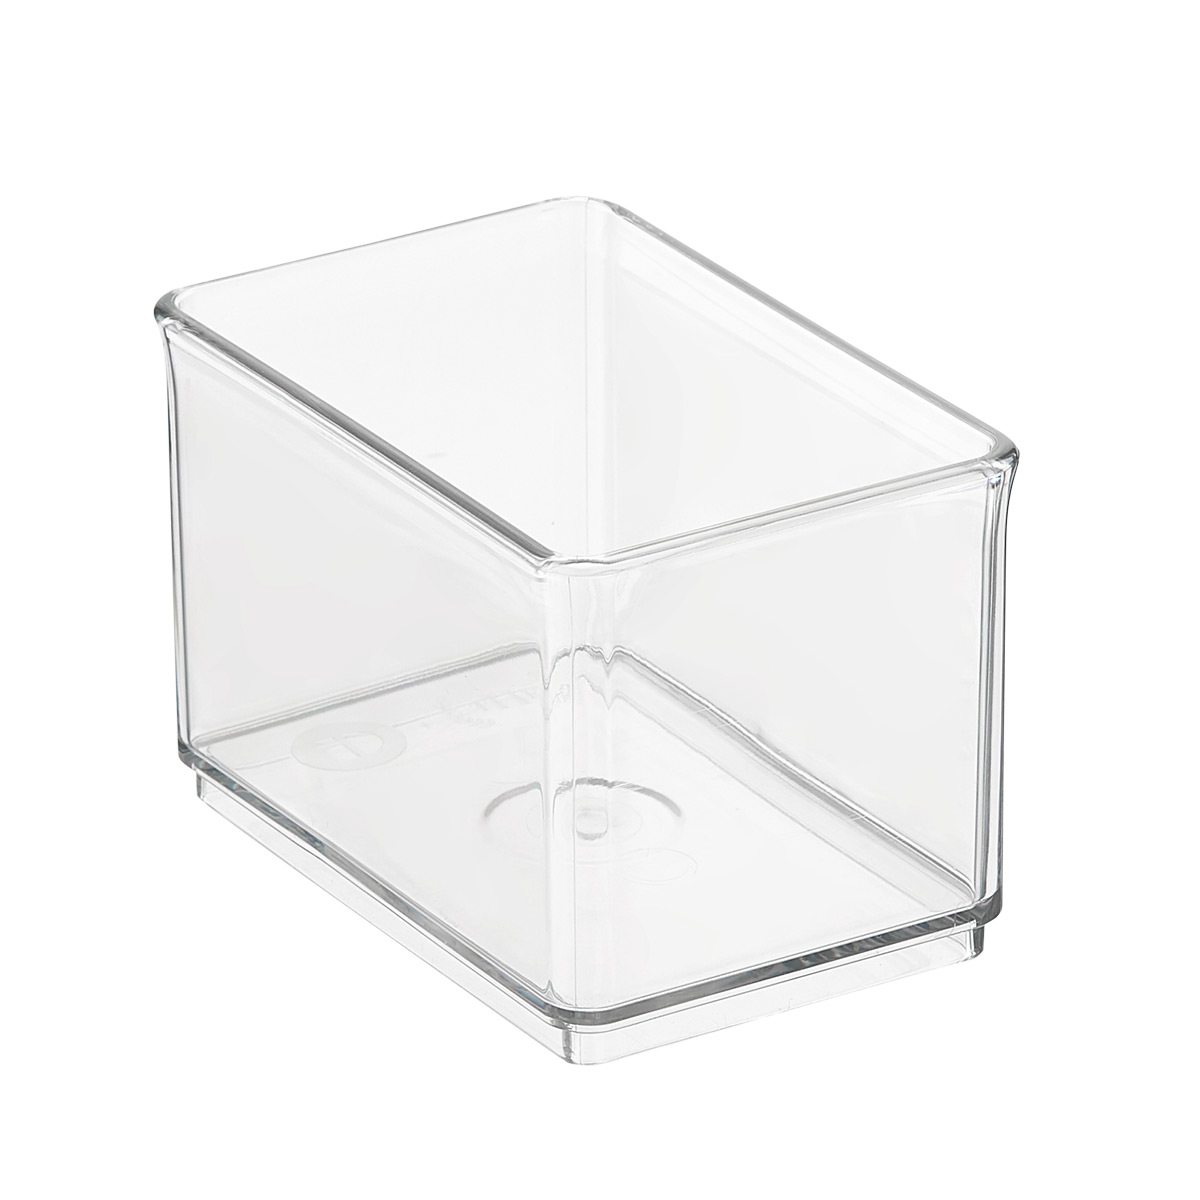 https://www.containerstore.com/catalogimages/364022/10077091-T.H.E.-bin-organizer-small.jpg